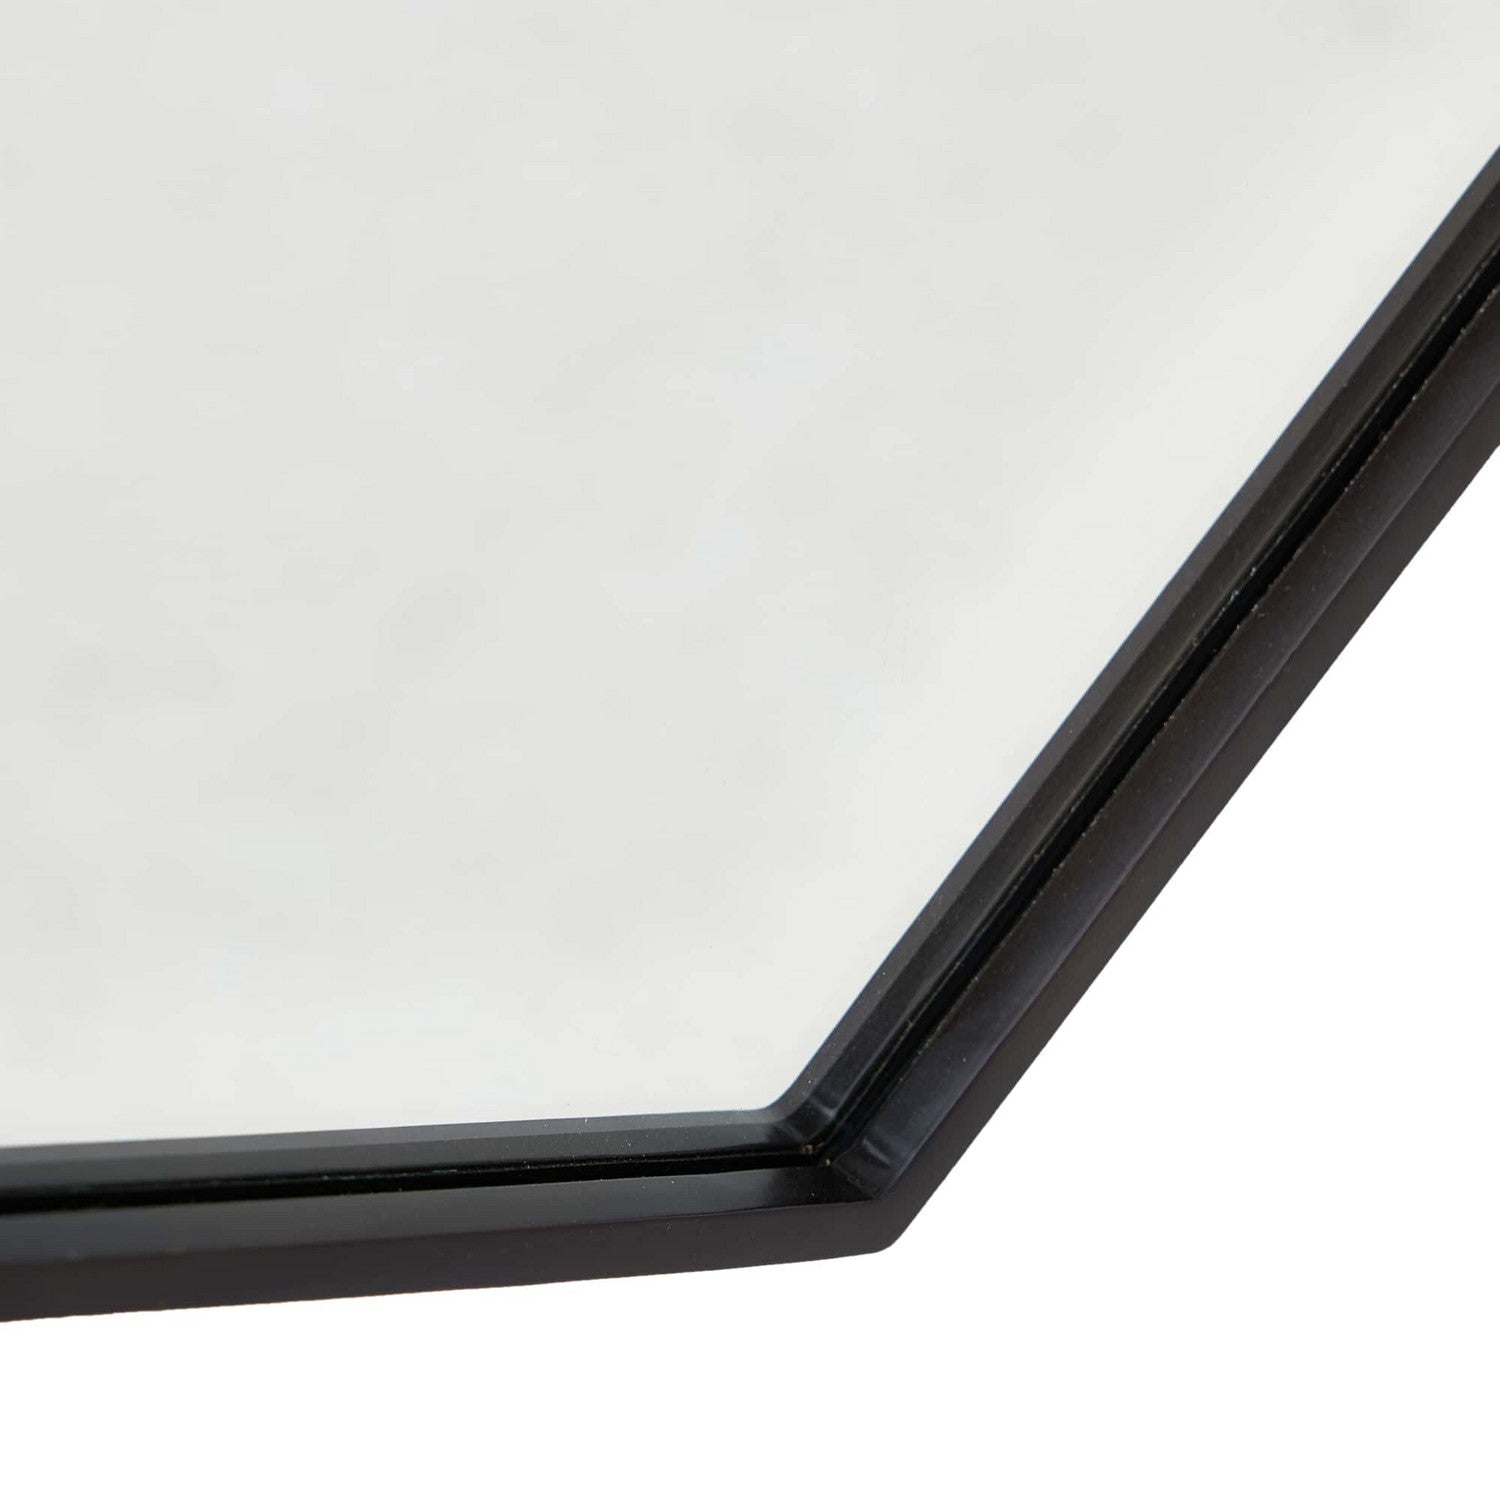 Mirror from the Talland collection in Bronze finish